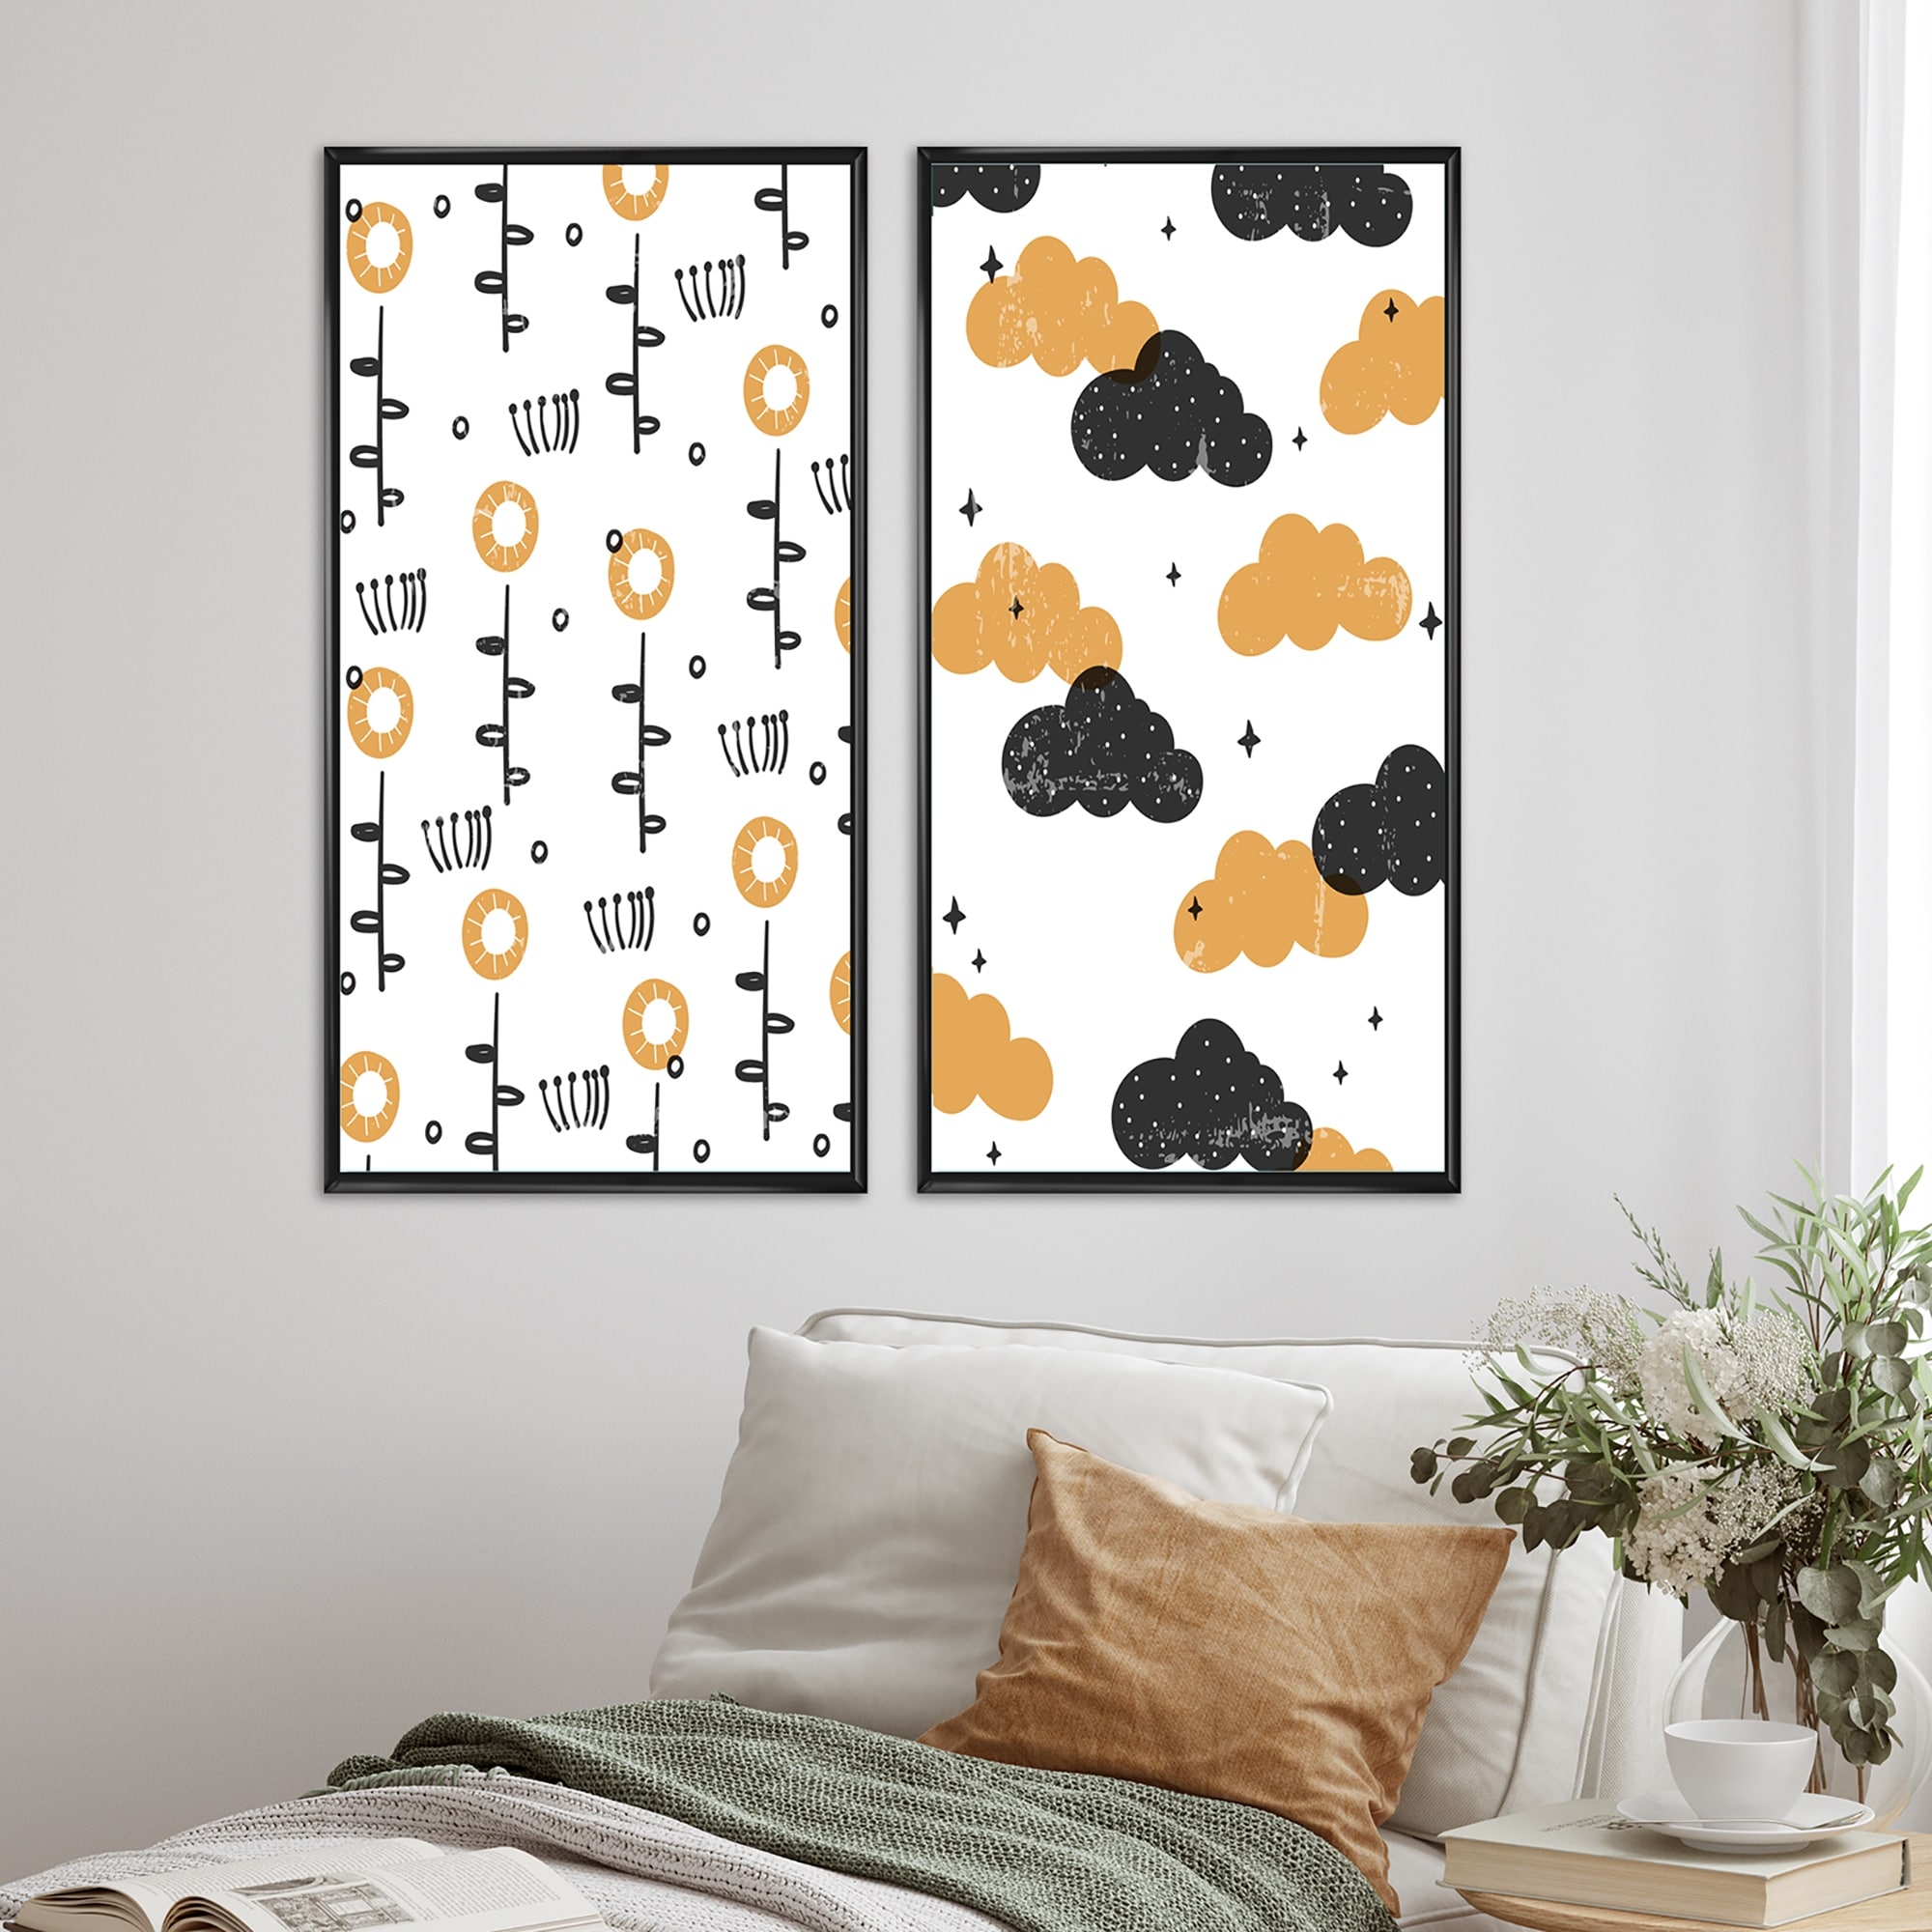 Designart "Retro Color Primitive Shapes With Clouds I" Abstract Framed Art Set of 2 Pieces